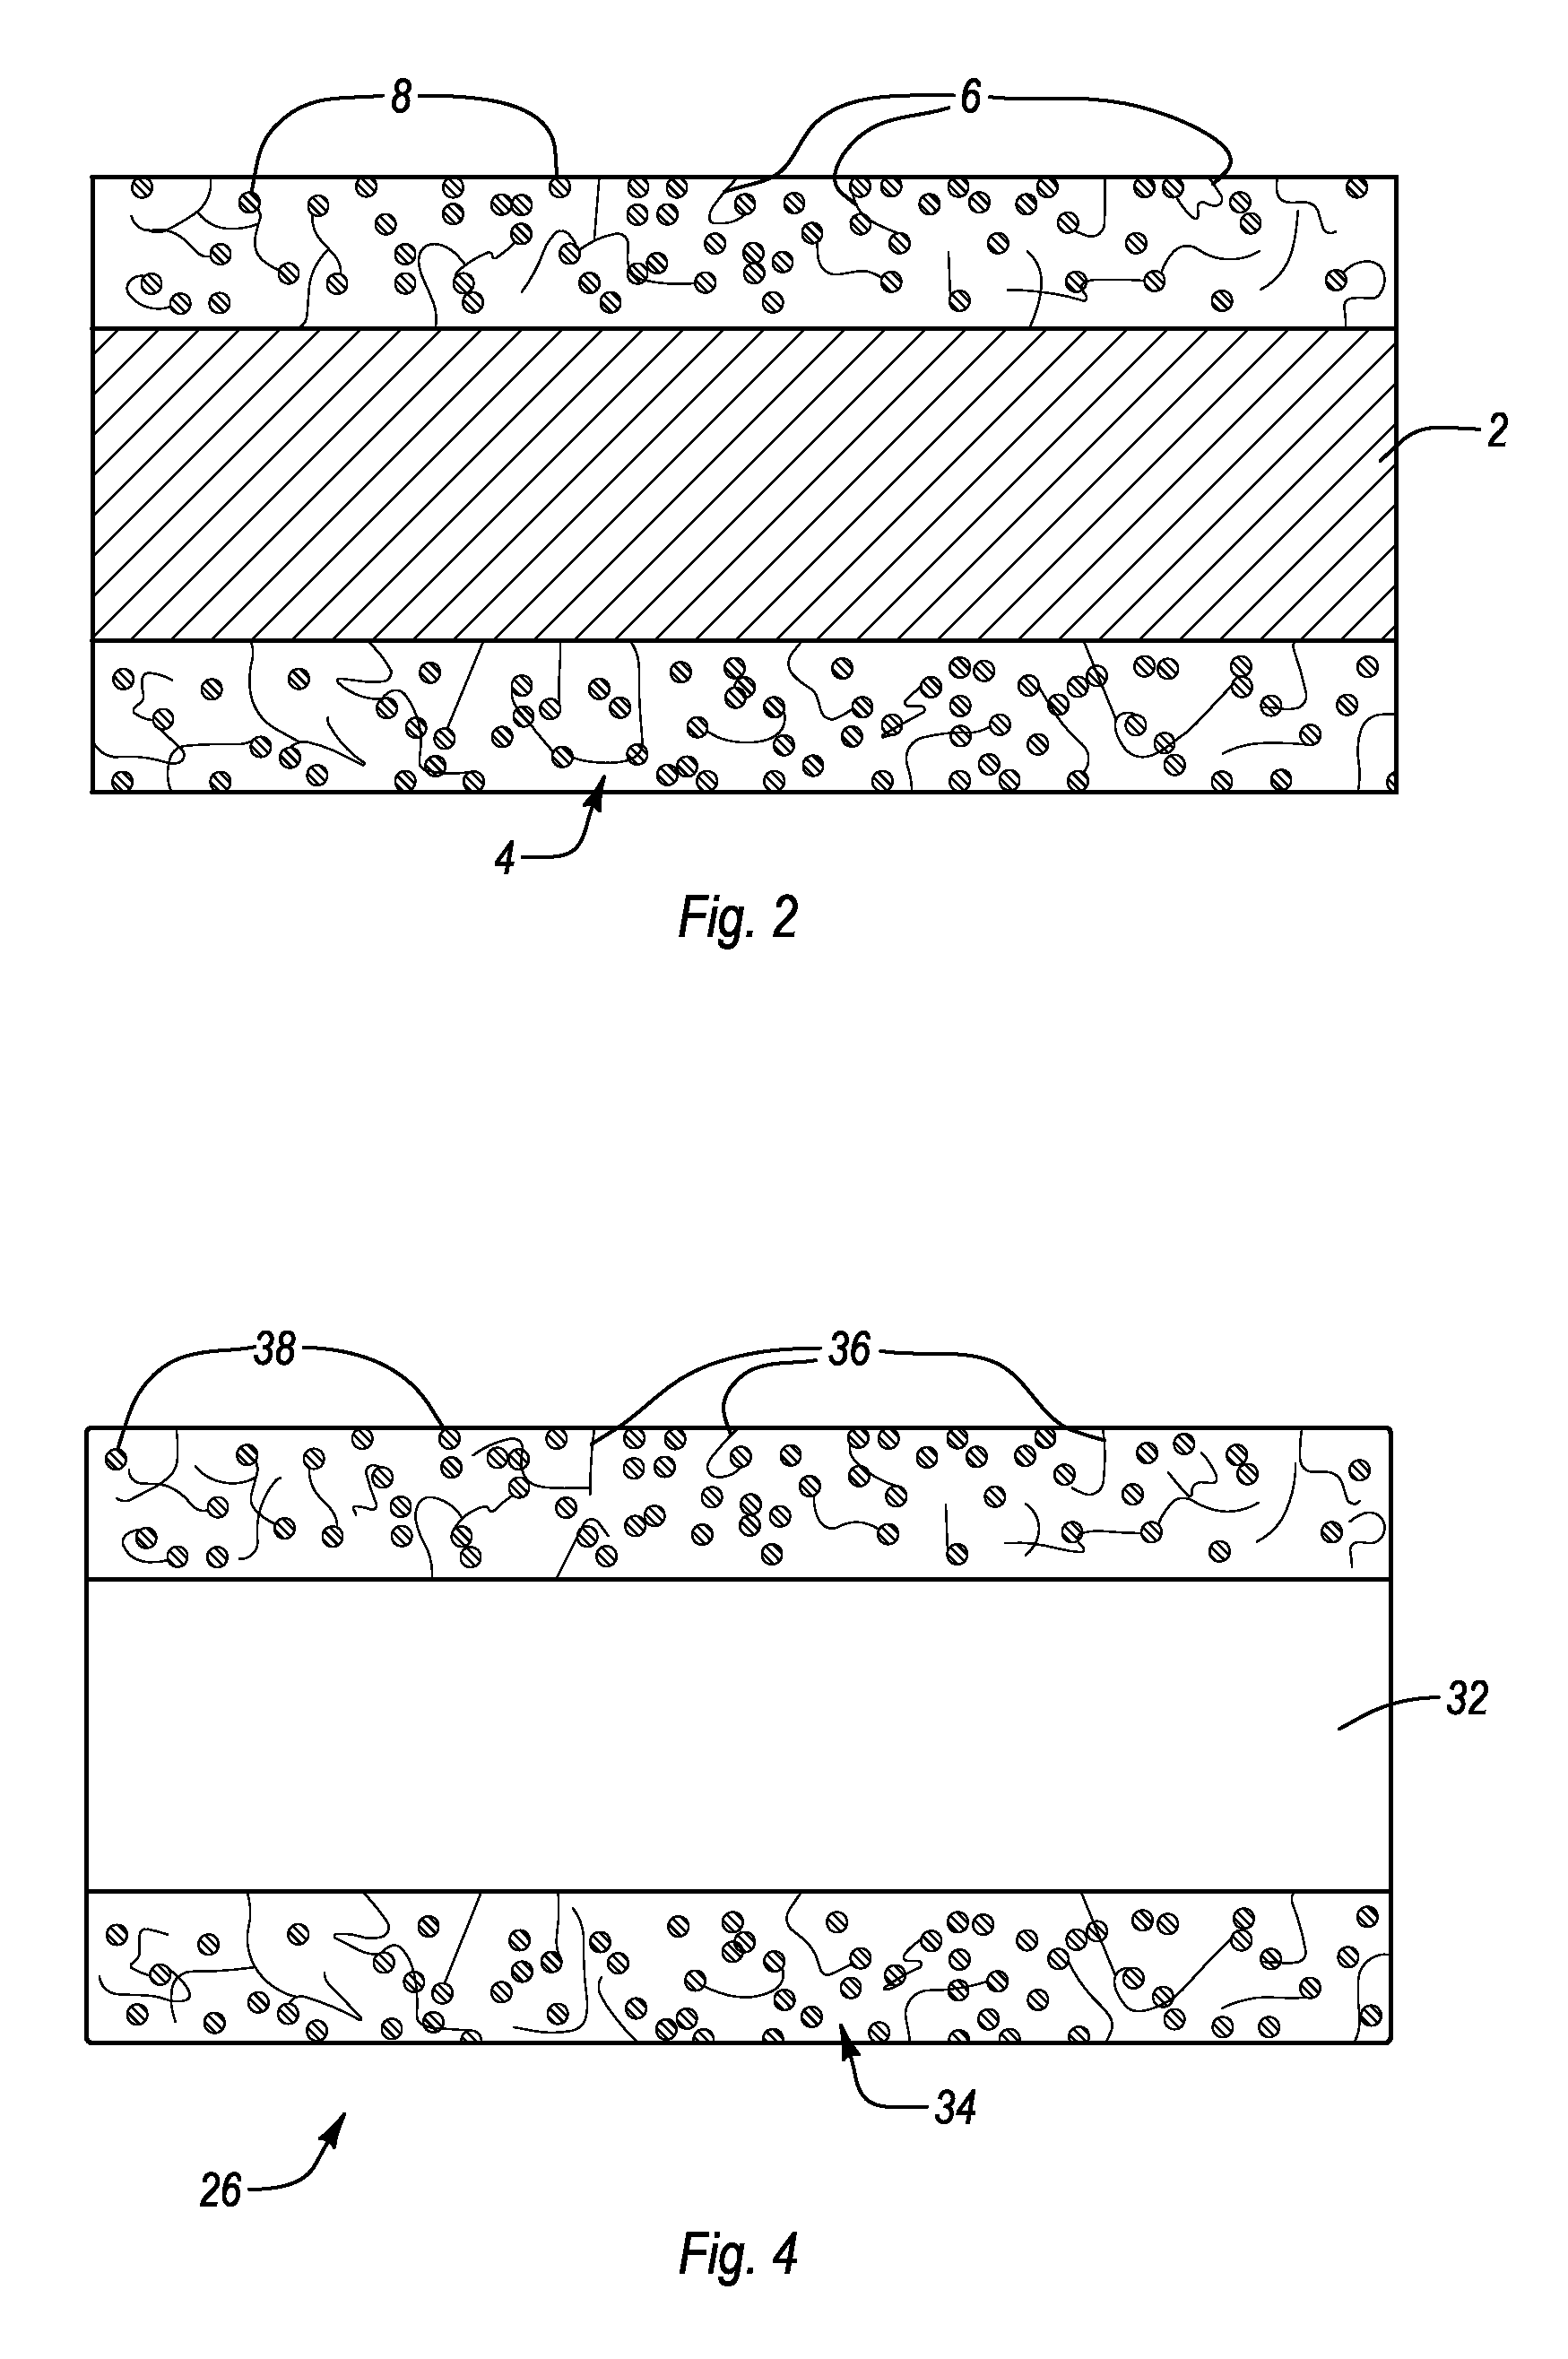 Drilling systems including fiber-containing diamond-impregnated cutting tools